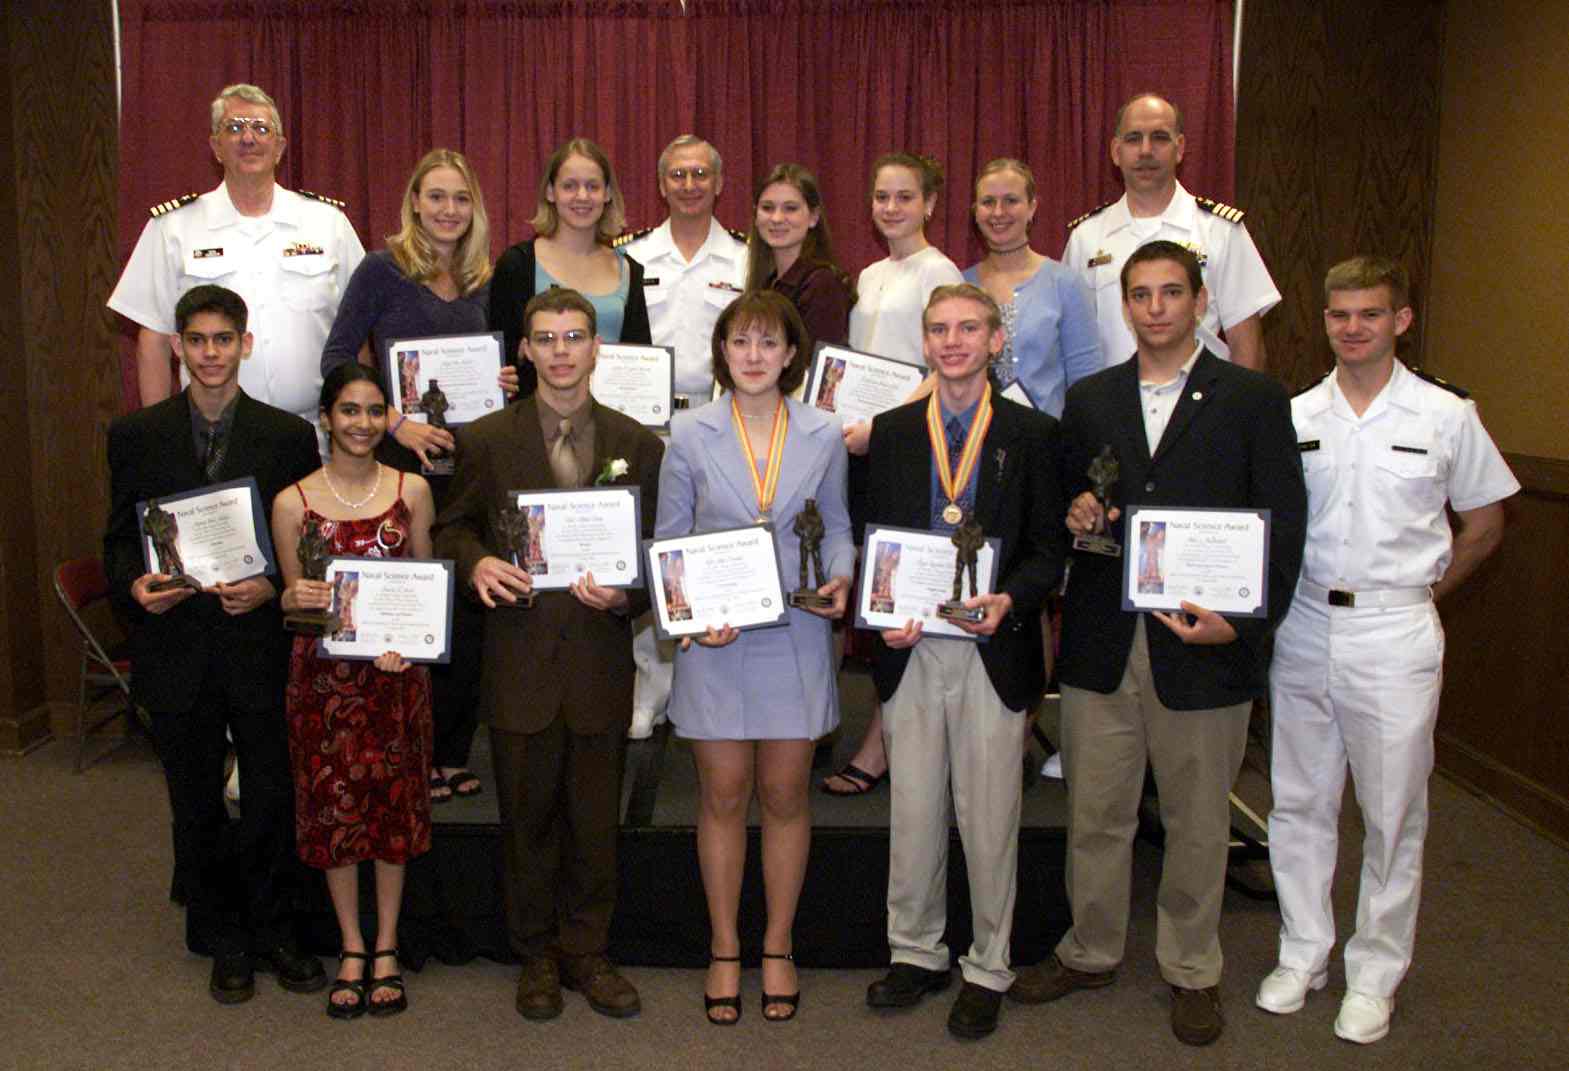 Above:  2001 Naval Science Award $8,000 Scholarship Winners with CAPT D.H. Rau, Commanding Officer of the Naval Research Lab, Retired CAPT James Venette, Chief Judge, Retired CAPT Ronald Johnson, Assistant Chief Judge, and Midshipman 4/C J.C. Payne, U.S. Naval Academy